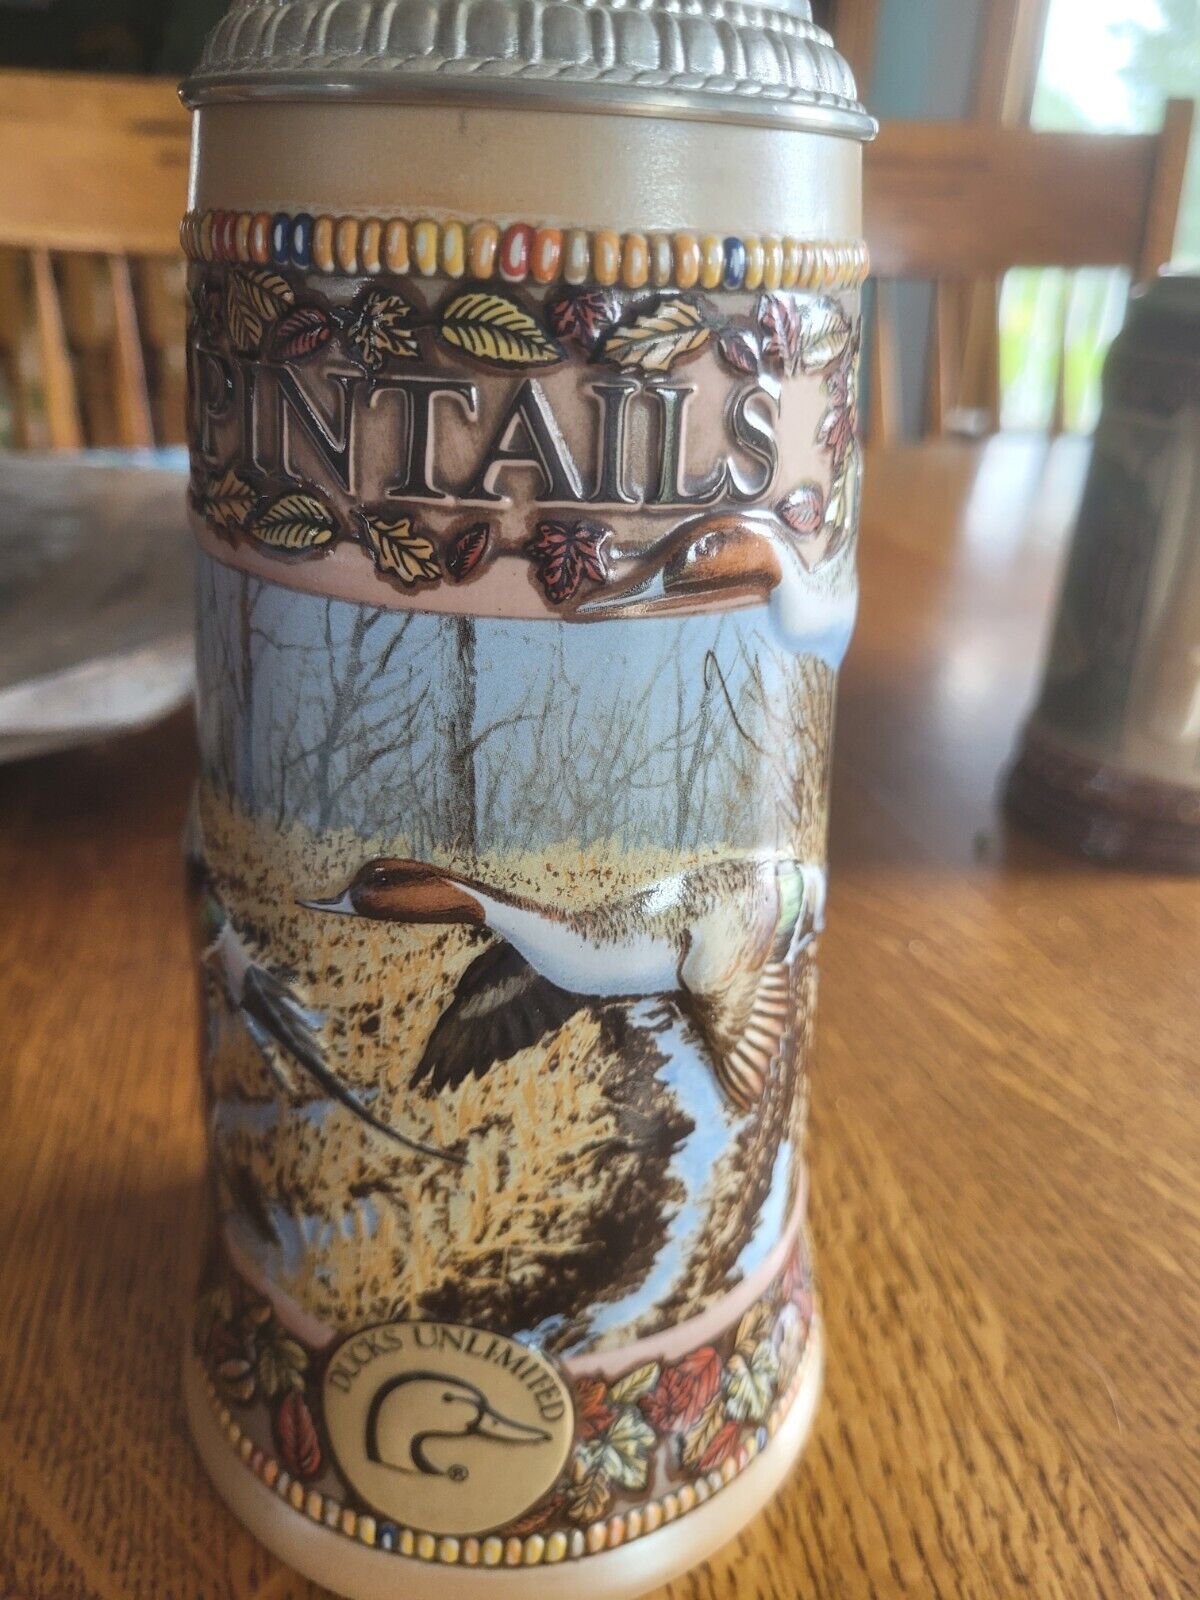 1989 Ducks Unlimited Pintail Beer Stein Fourth 3rd Edition The WATERFOWL Series